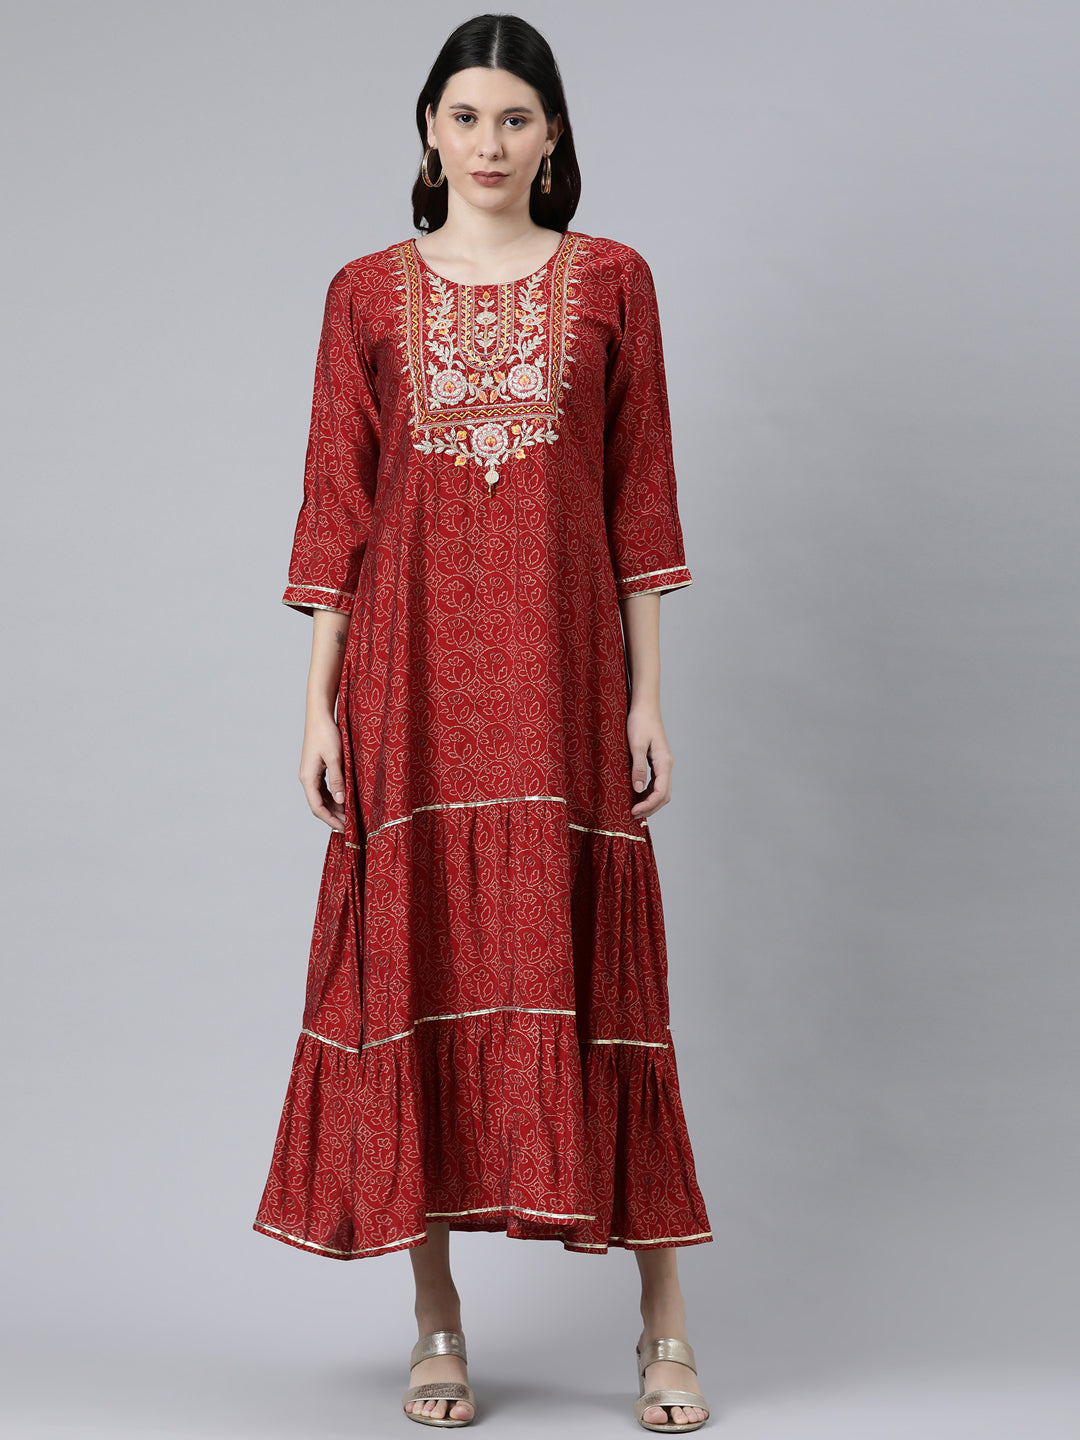 Neerus Maroon Cotton Ethnic Motifs Embroidered Ethnic A-Line Maxi Dress